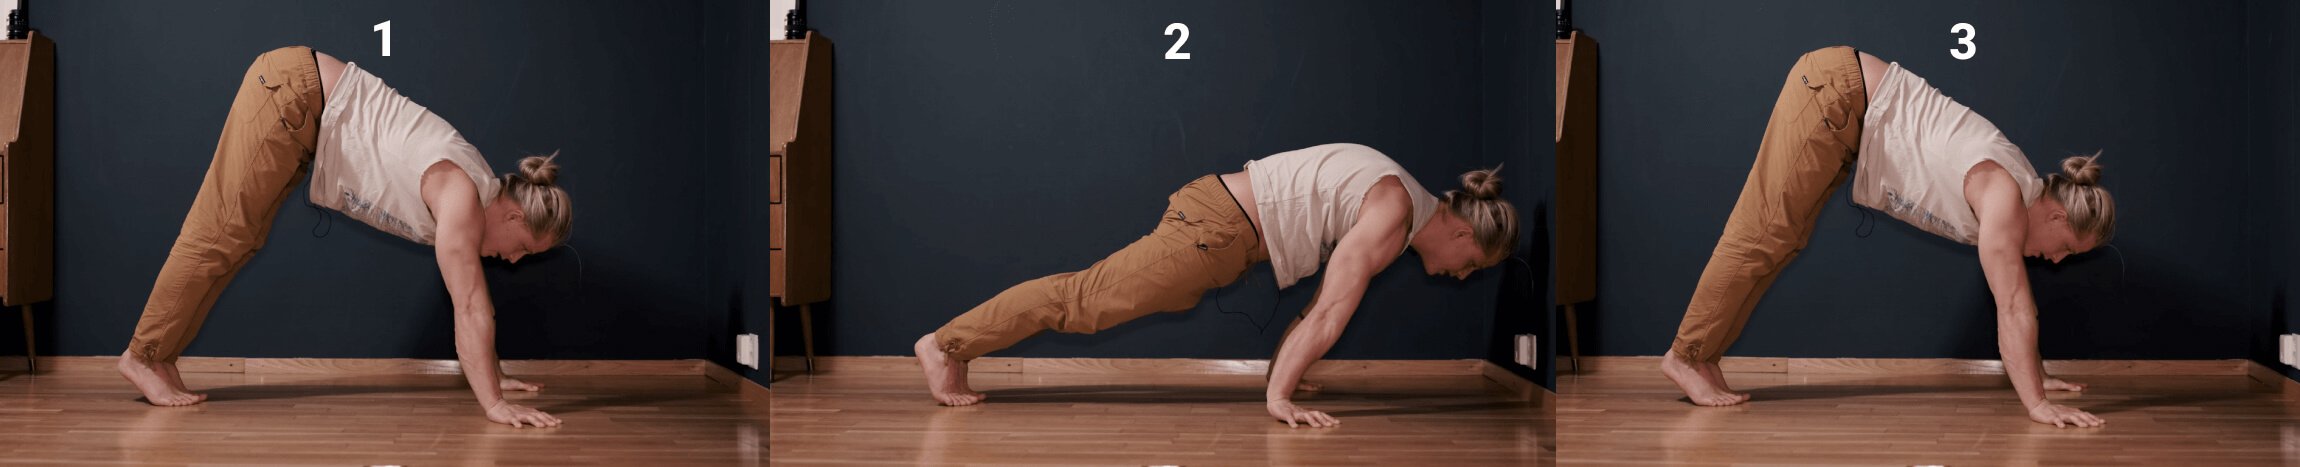 How to Learn Tuck Planche in 3 Steps — BERG MOVEMENT